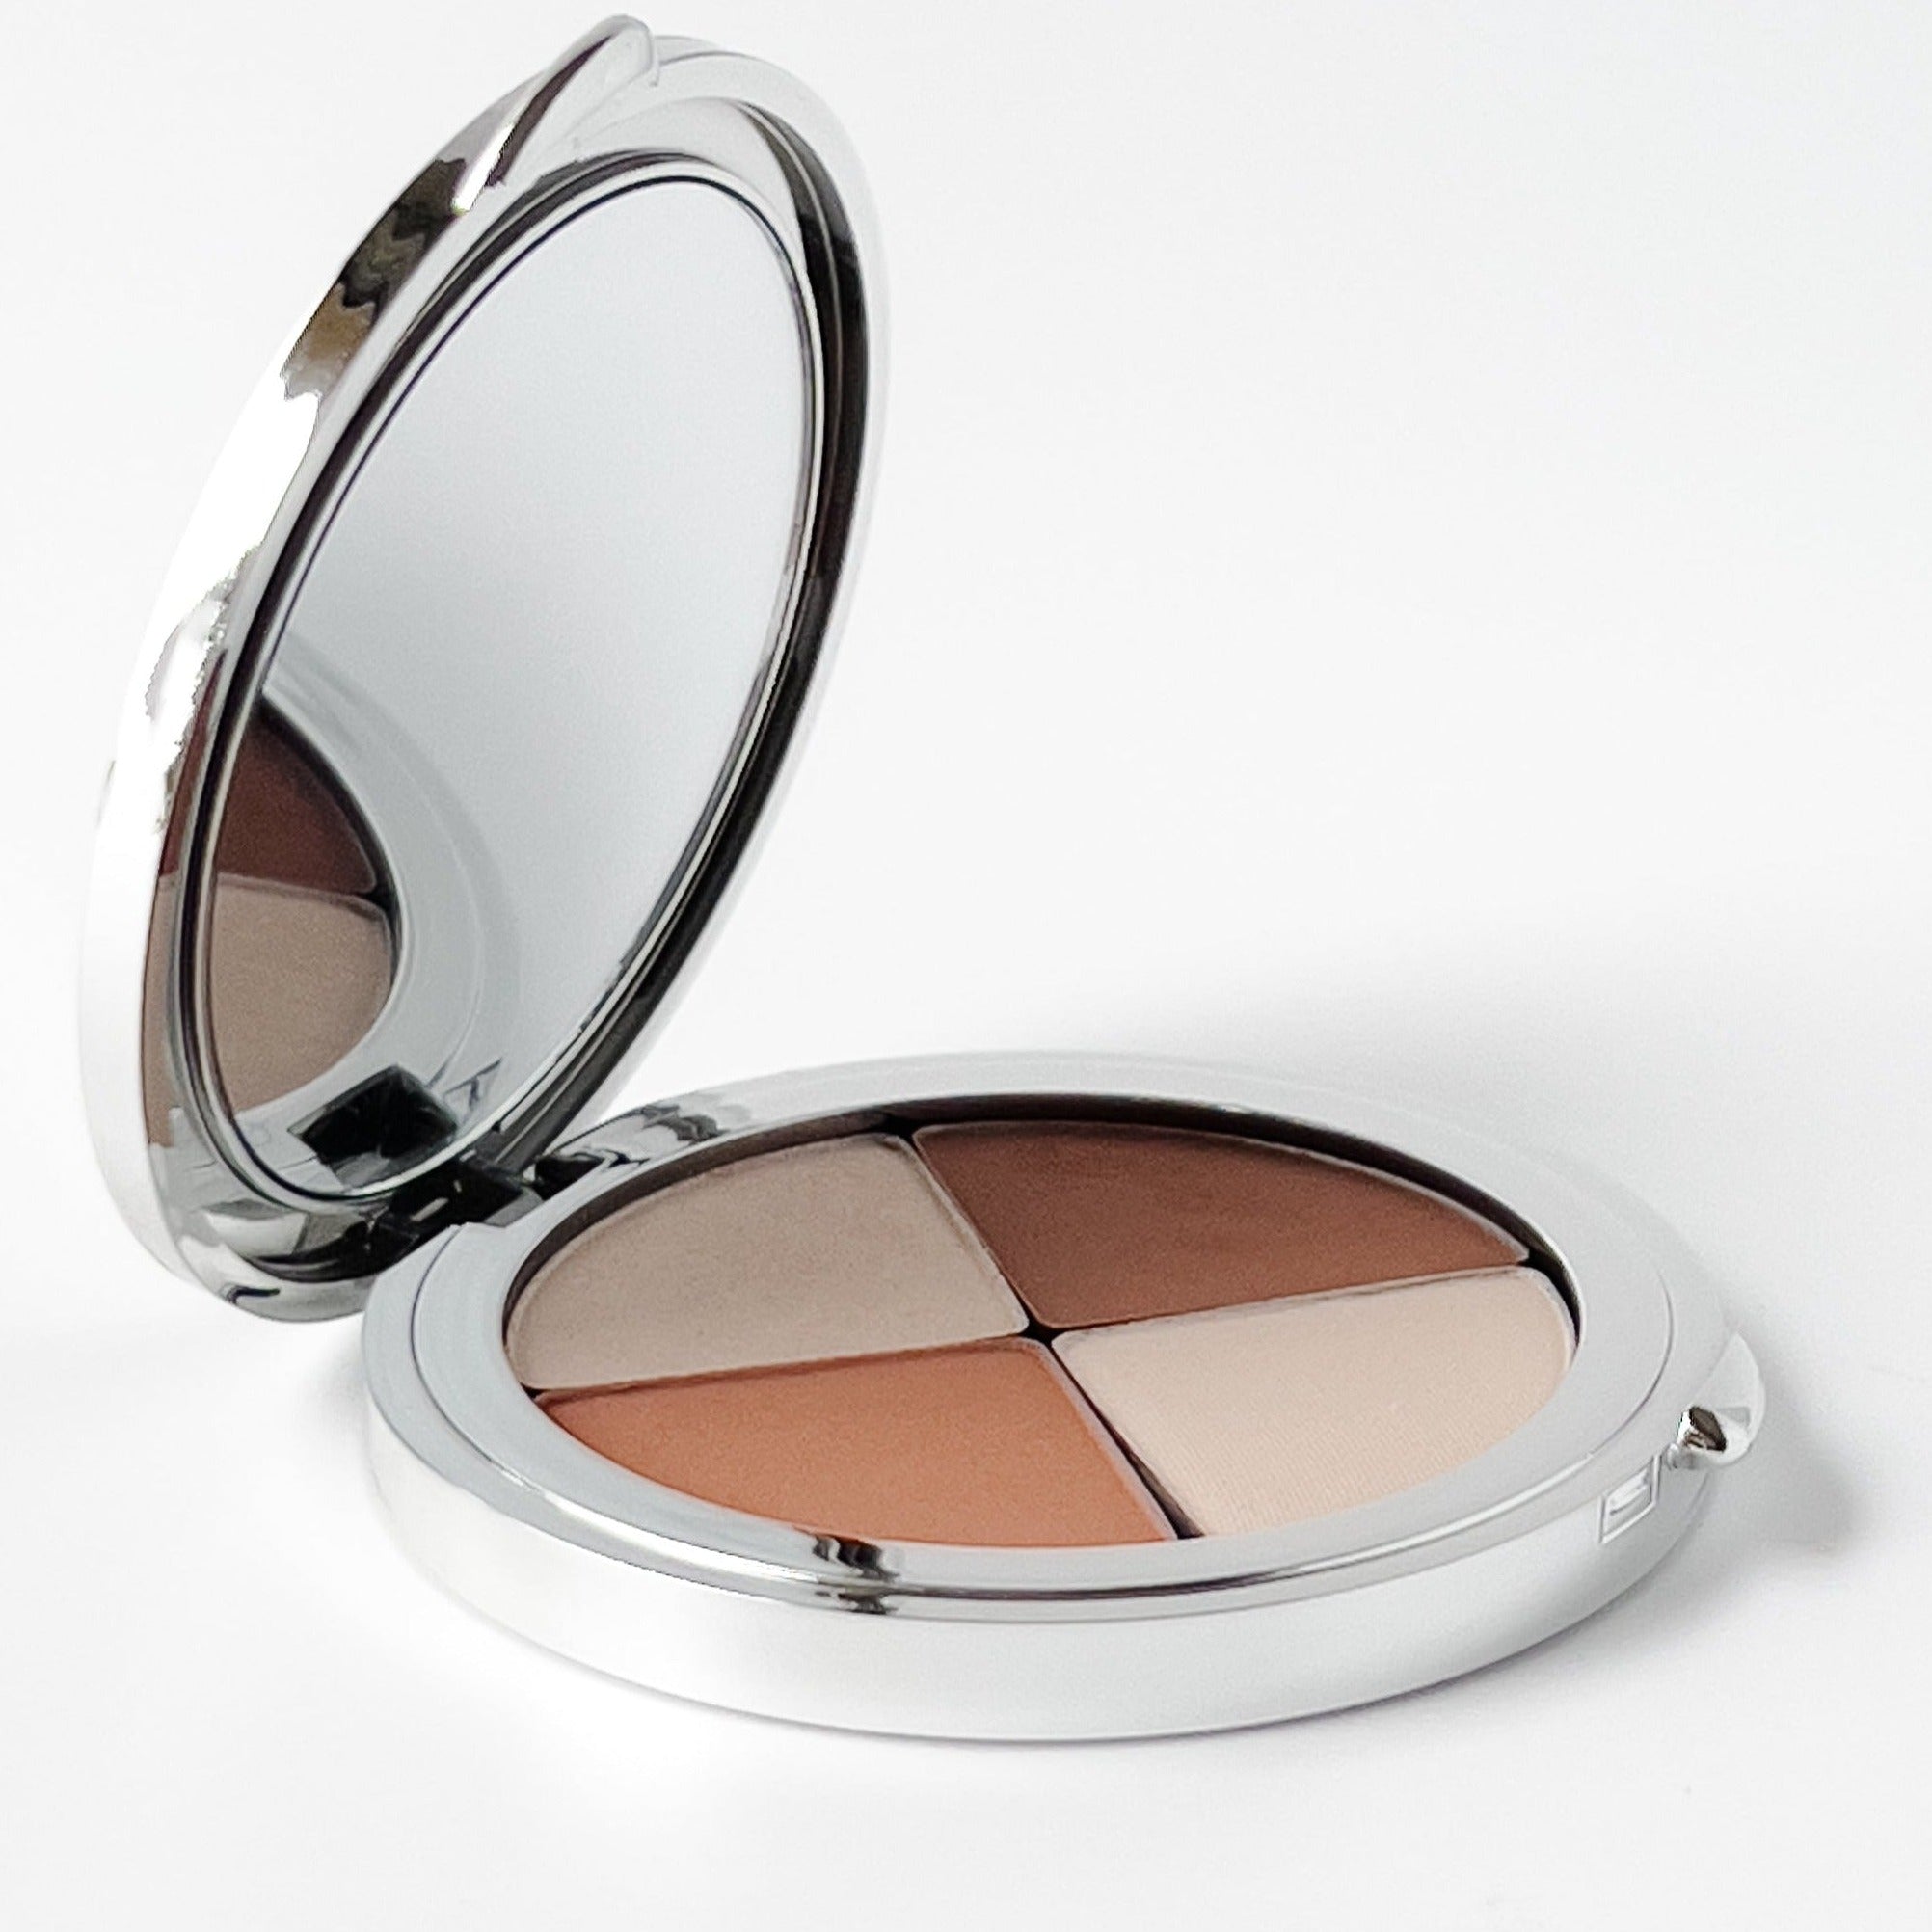 4 color, round compact palette shown from the side with a mirror and 4 triangles and shades of mineral makeup